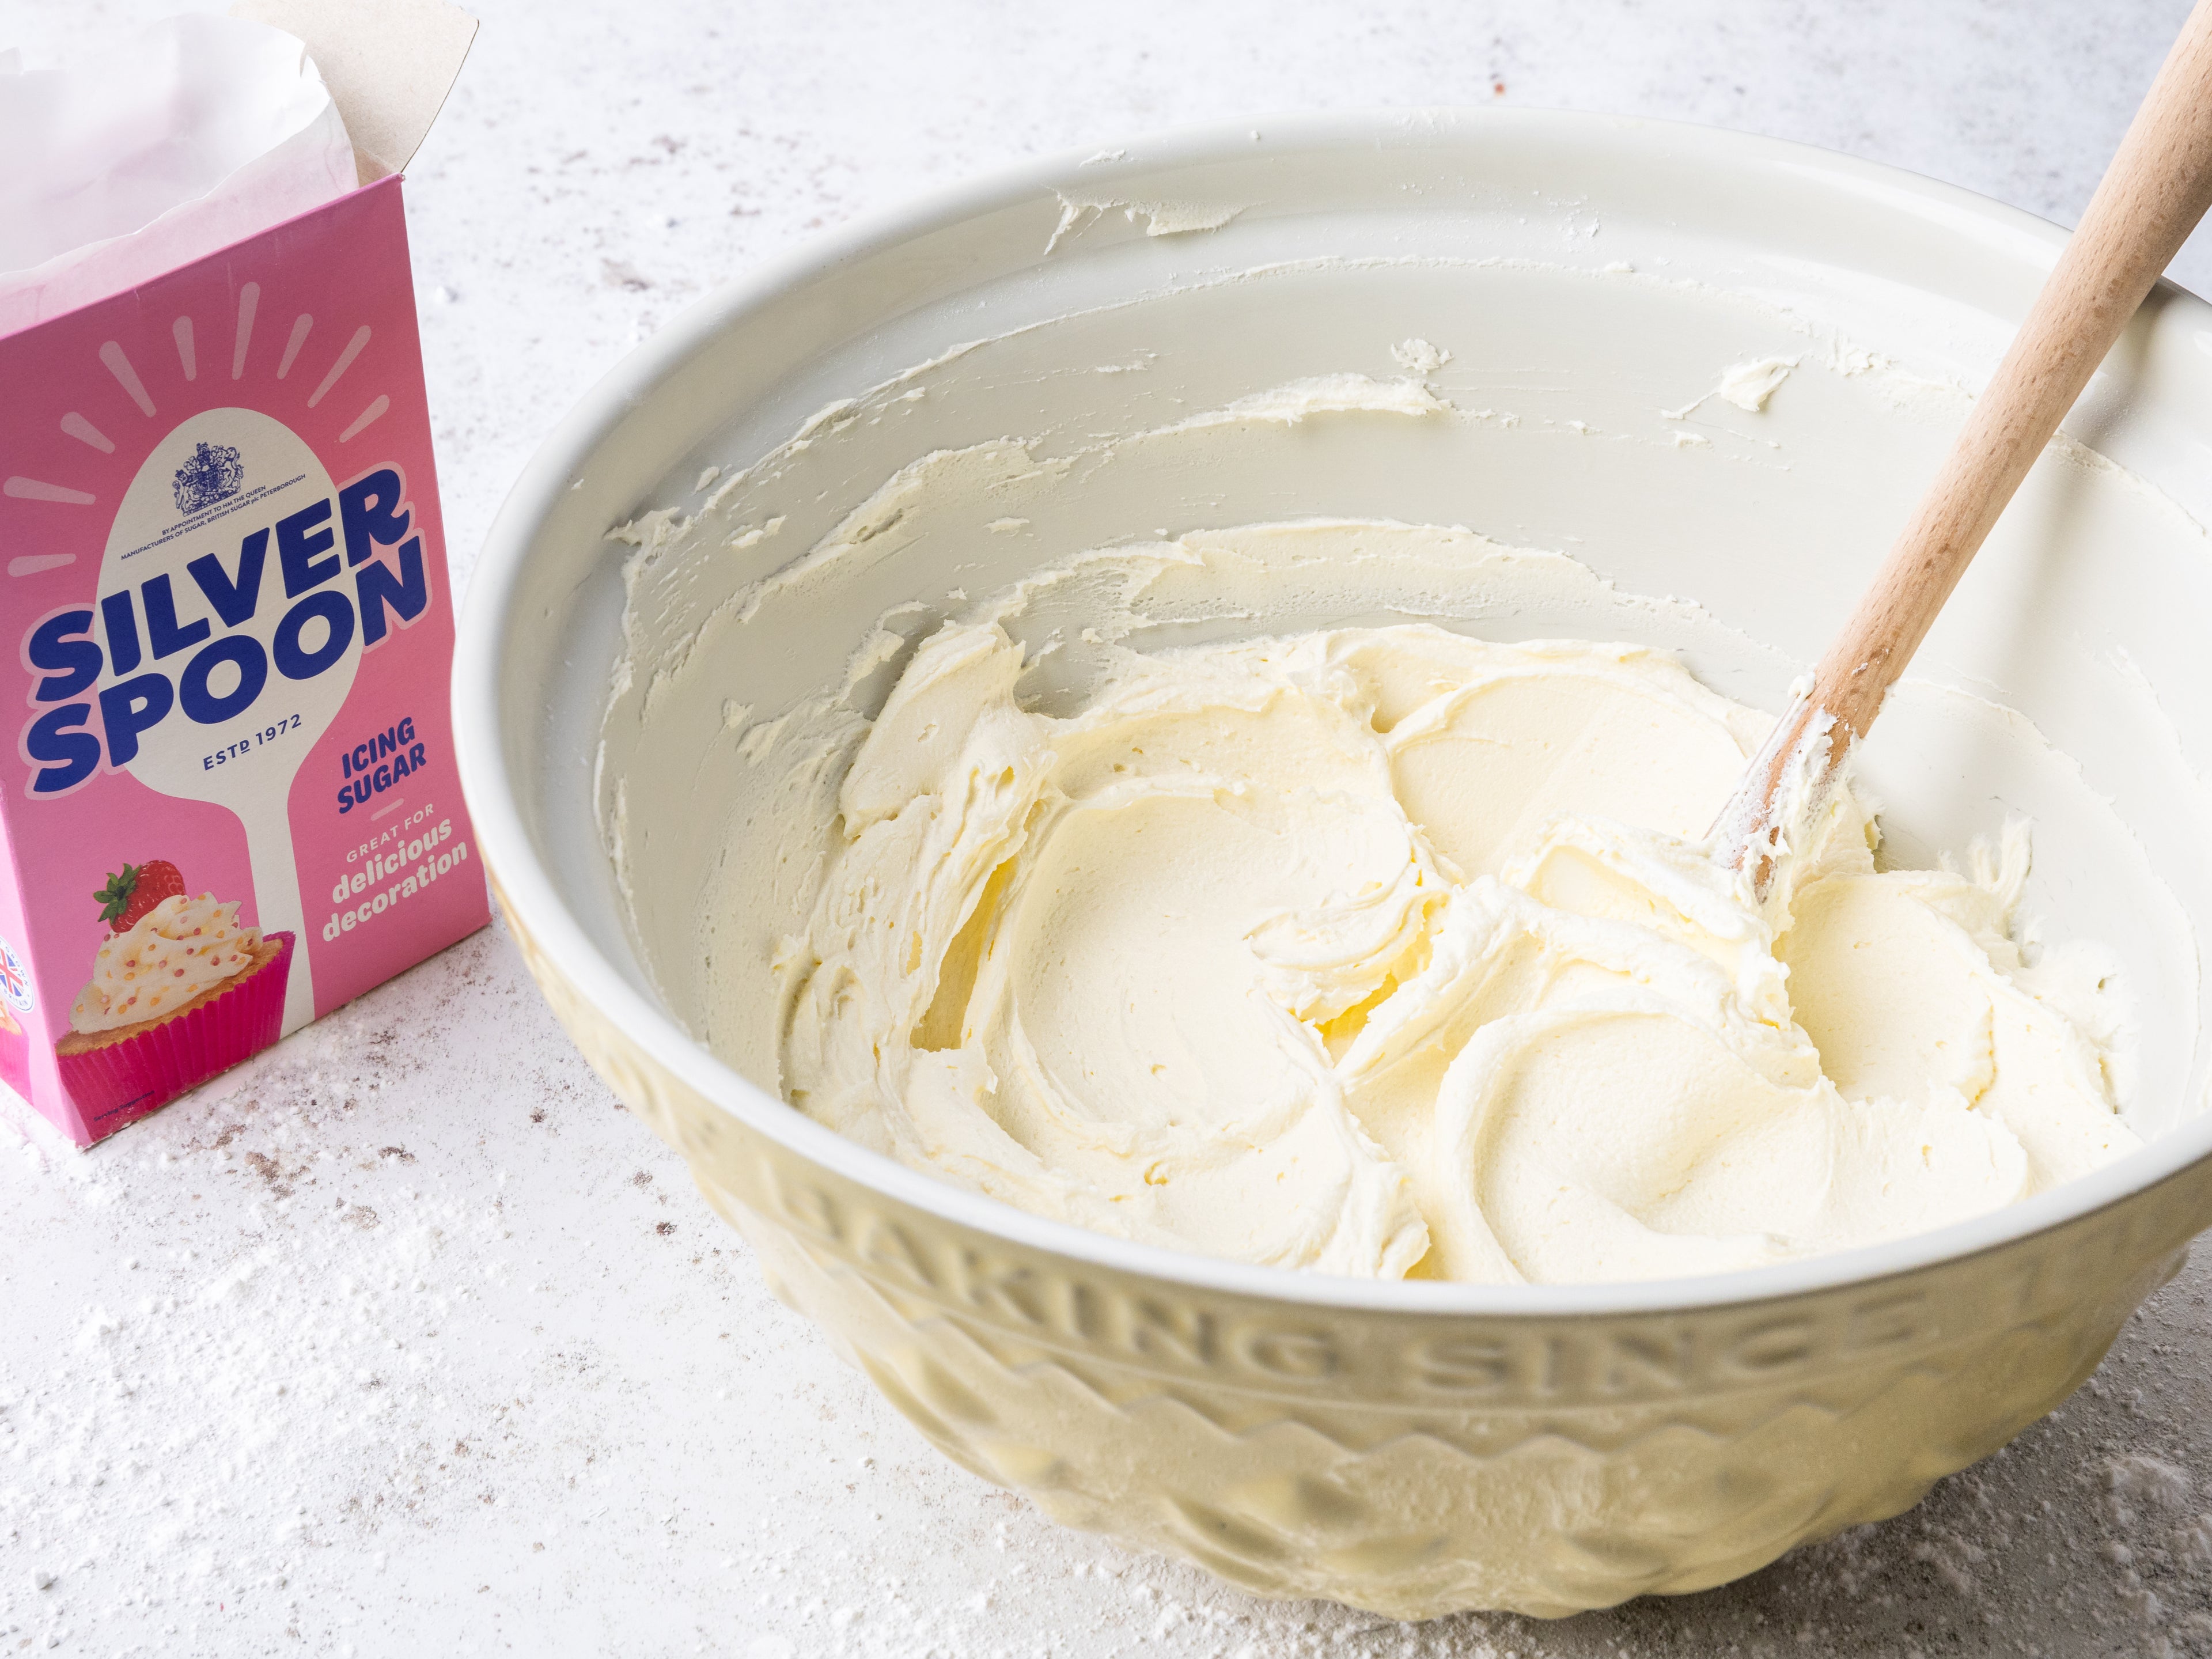 Buttercream in a bowl beside a pack of icing sugar